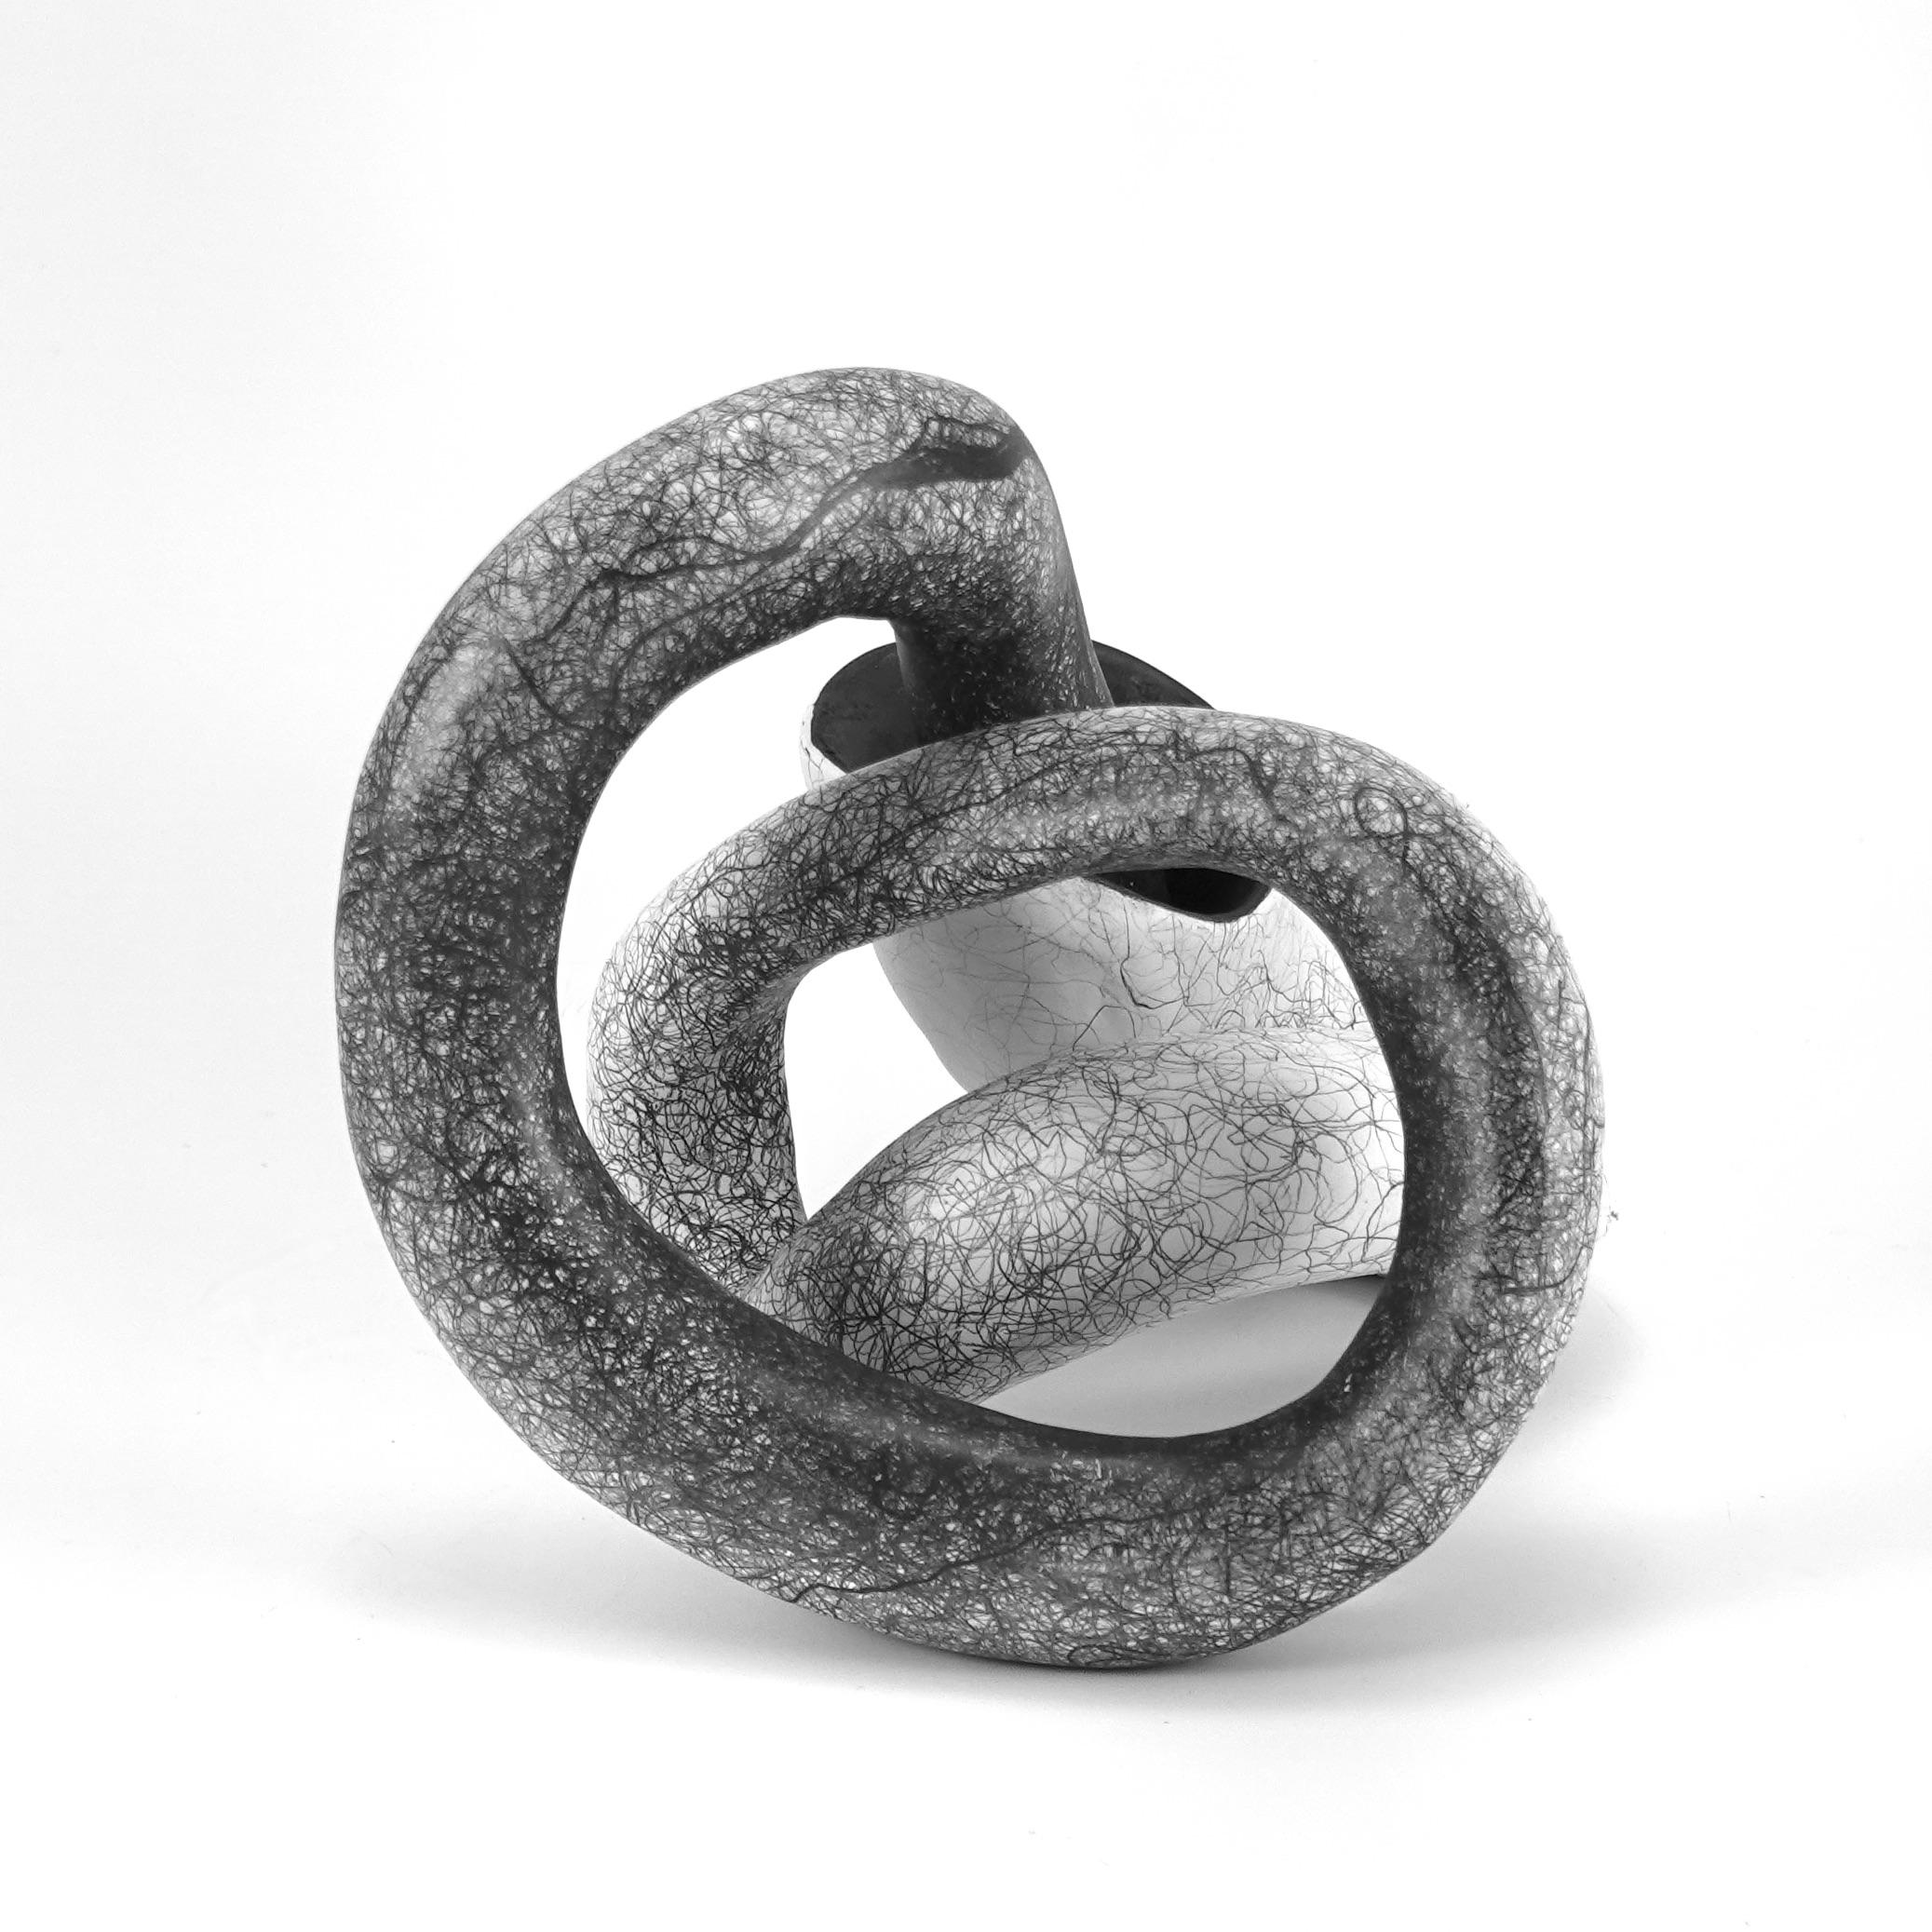 My biomorphic abstractions range from intimate to immersive in scale, referencing our interconnectedness. 
 Building curvilinear ceramic sculpture and then drawing intertwined graphite lines on the surface, creates energy that seems to emanate from